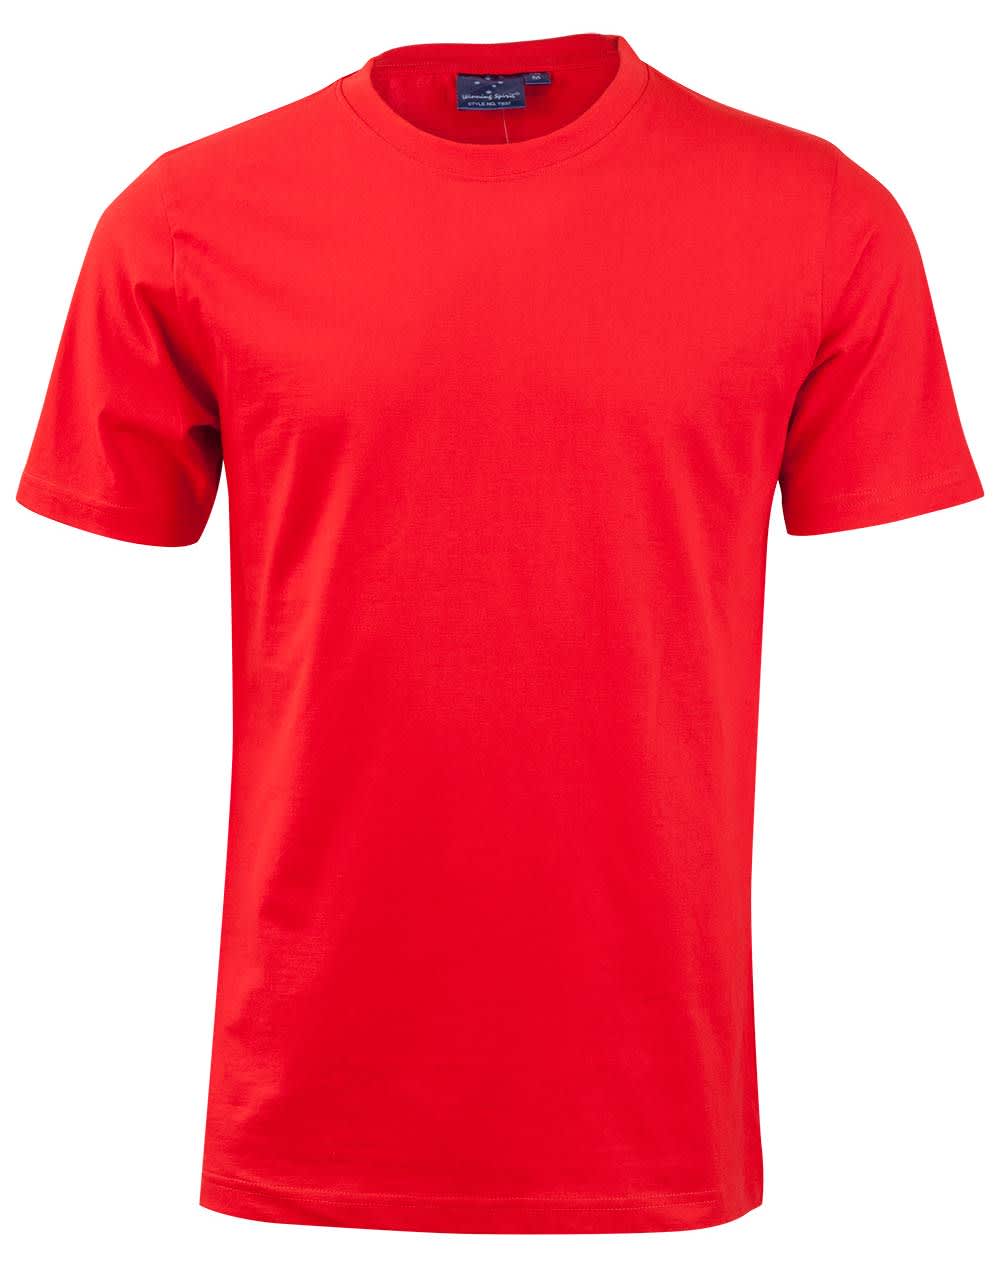 Mens 100% Cotton Semi Fitted Tee Shirt TS37 | Red